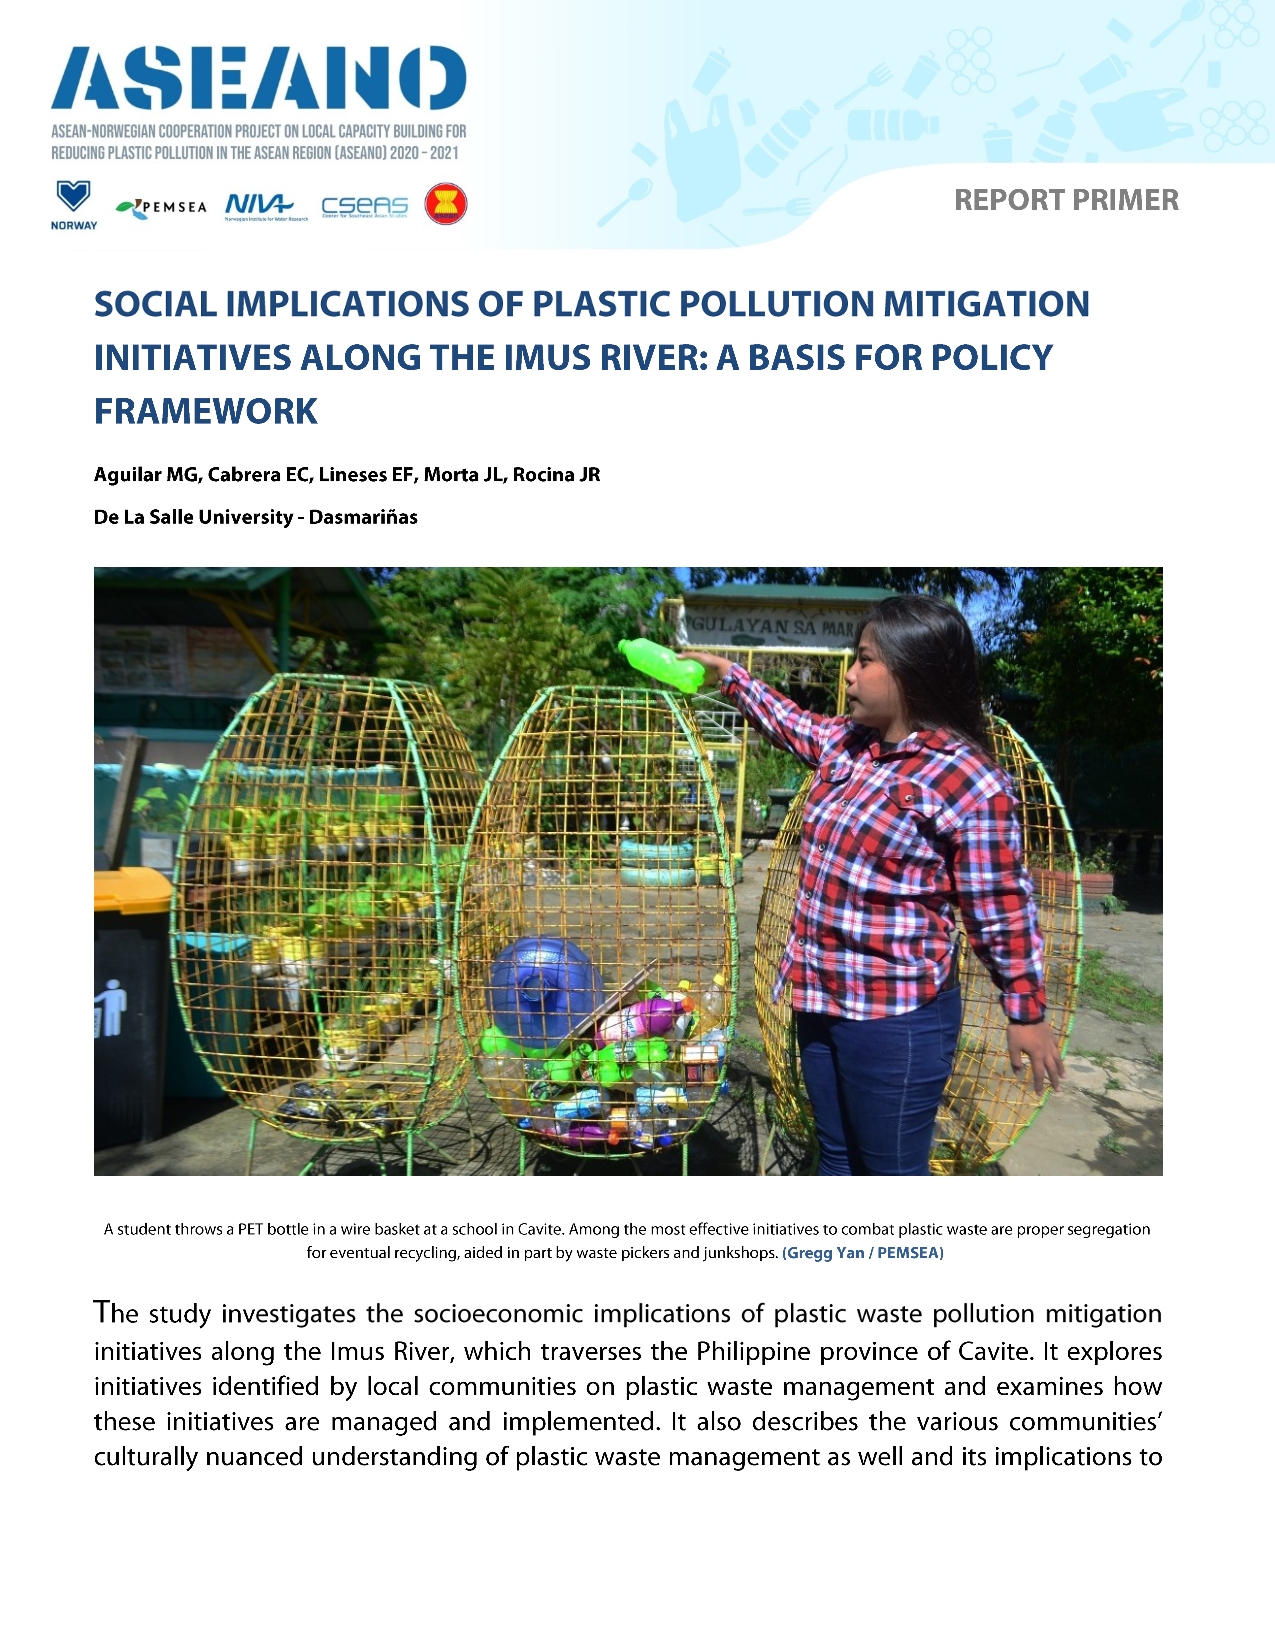 ASEANO Primer: Social Implications of Plastic Pollution Mitigation Initiatives Along the Imus River